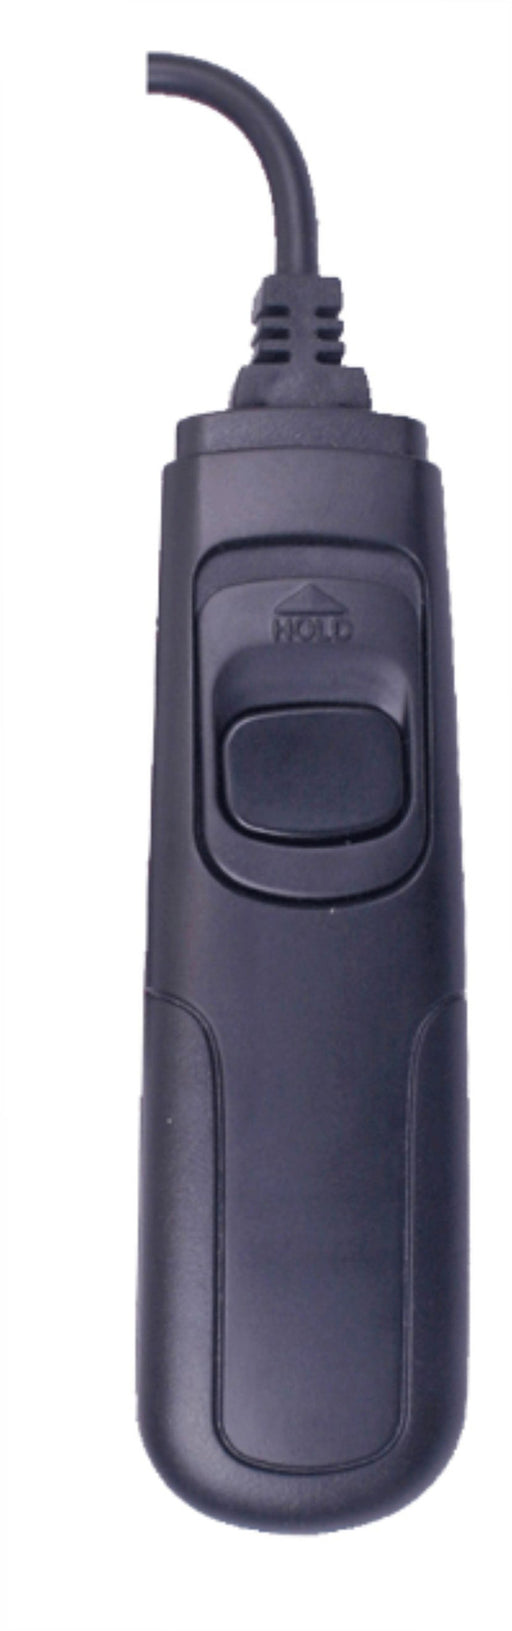 Wired Shutter Release for Nikon 10 Pin - AMERICAN RECORDER TECHNOLOGIES, INC.